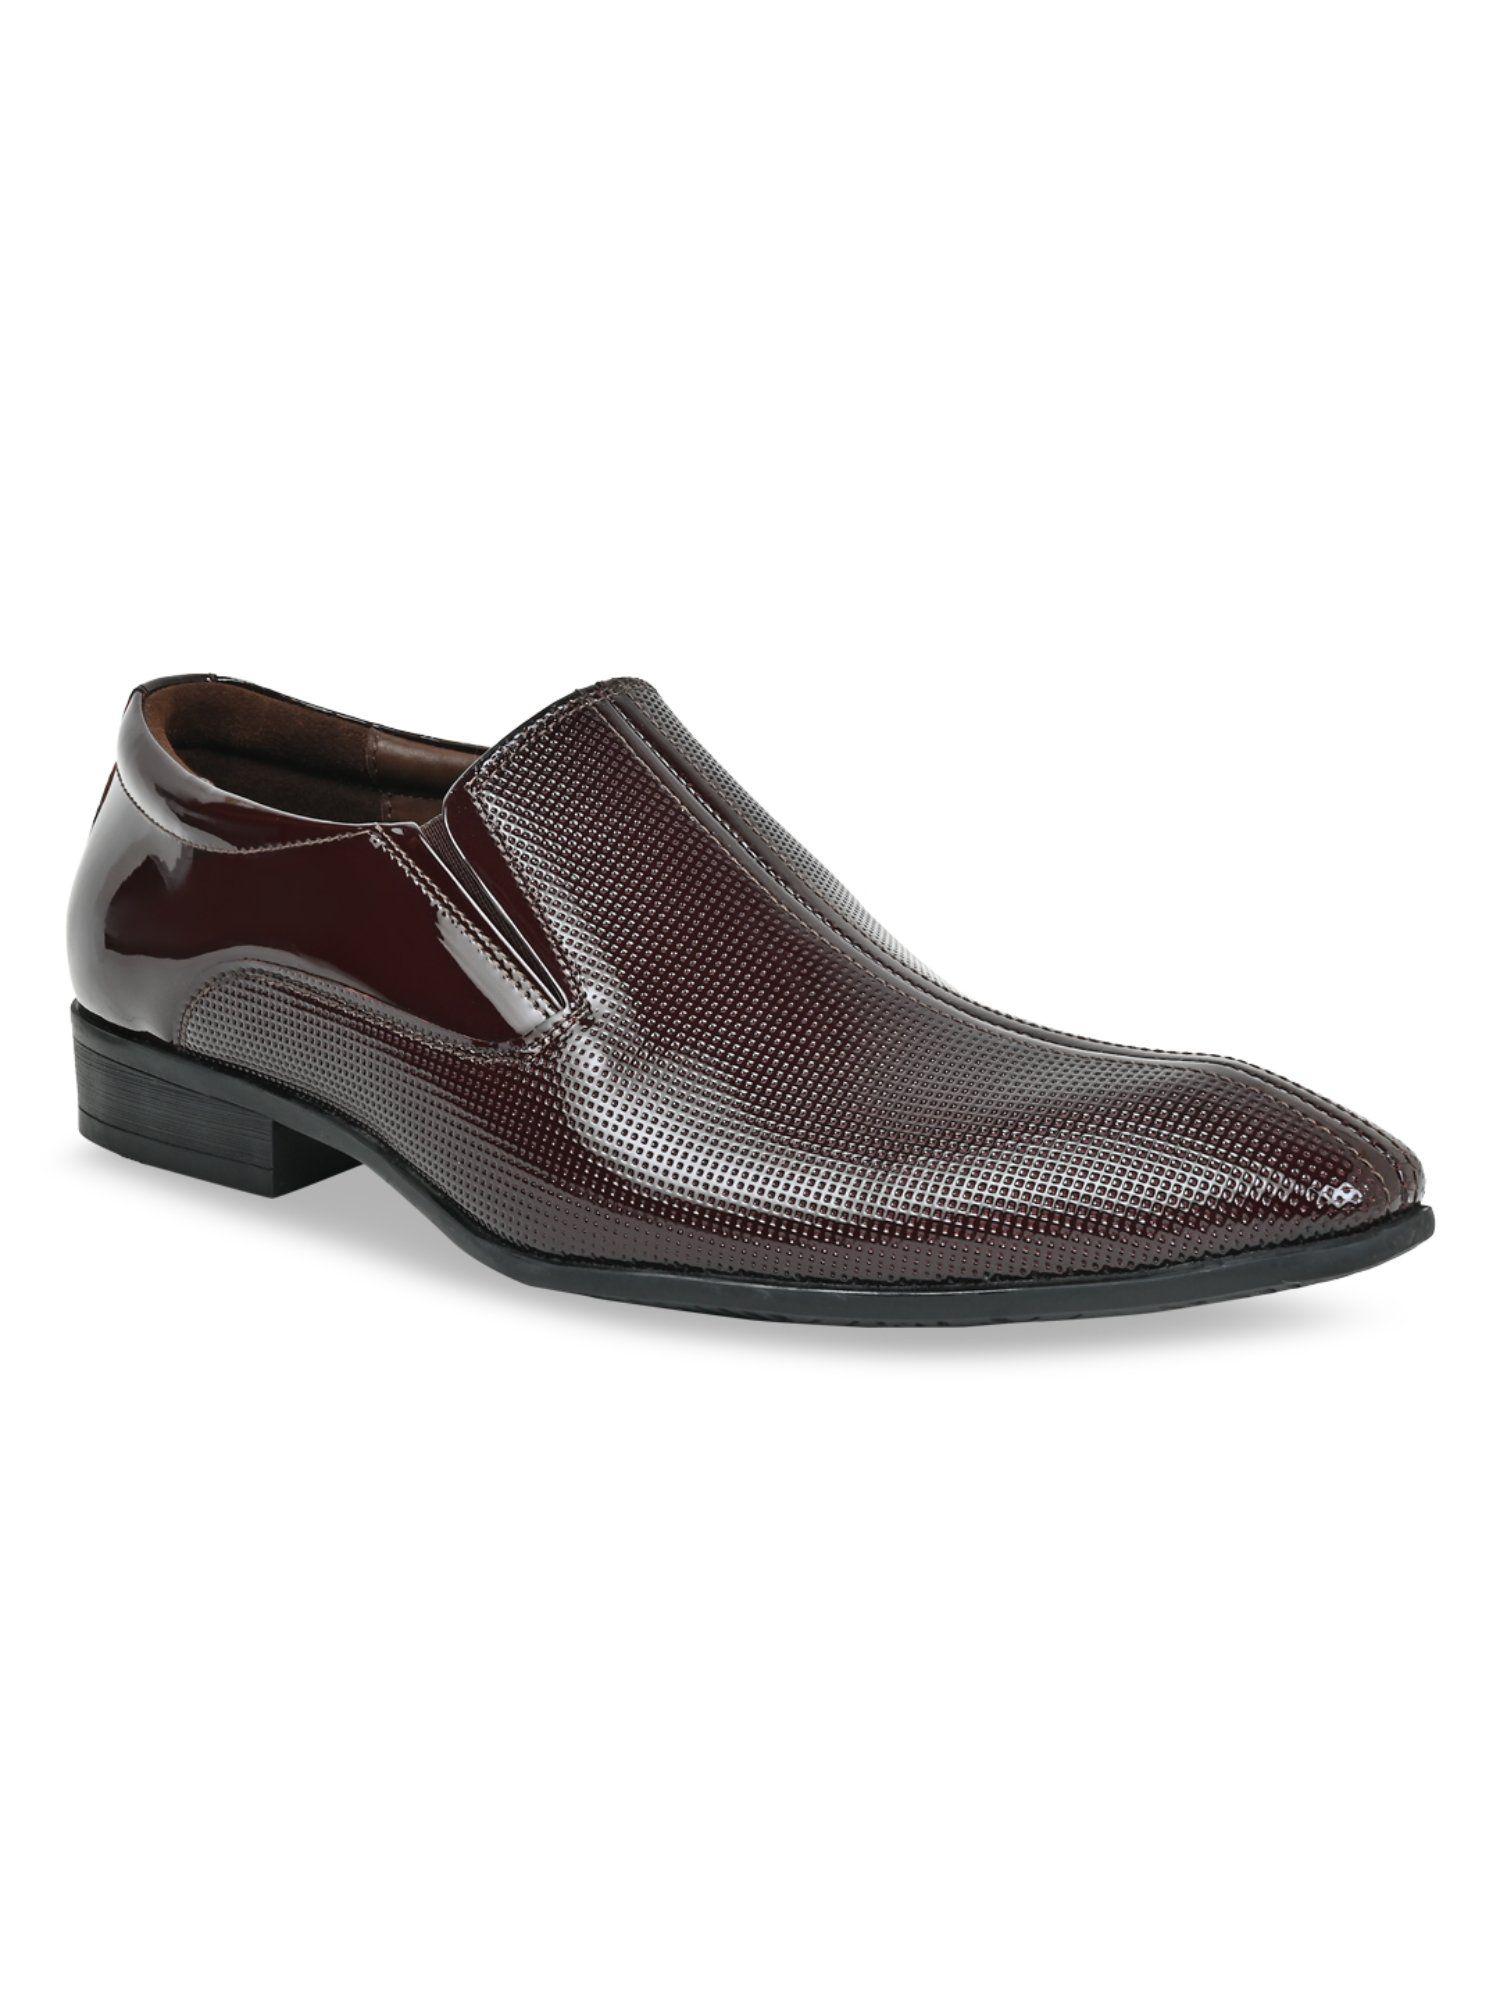 burgundy-men-textured-leather-formal-patent-shoes